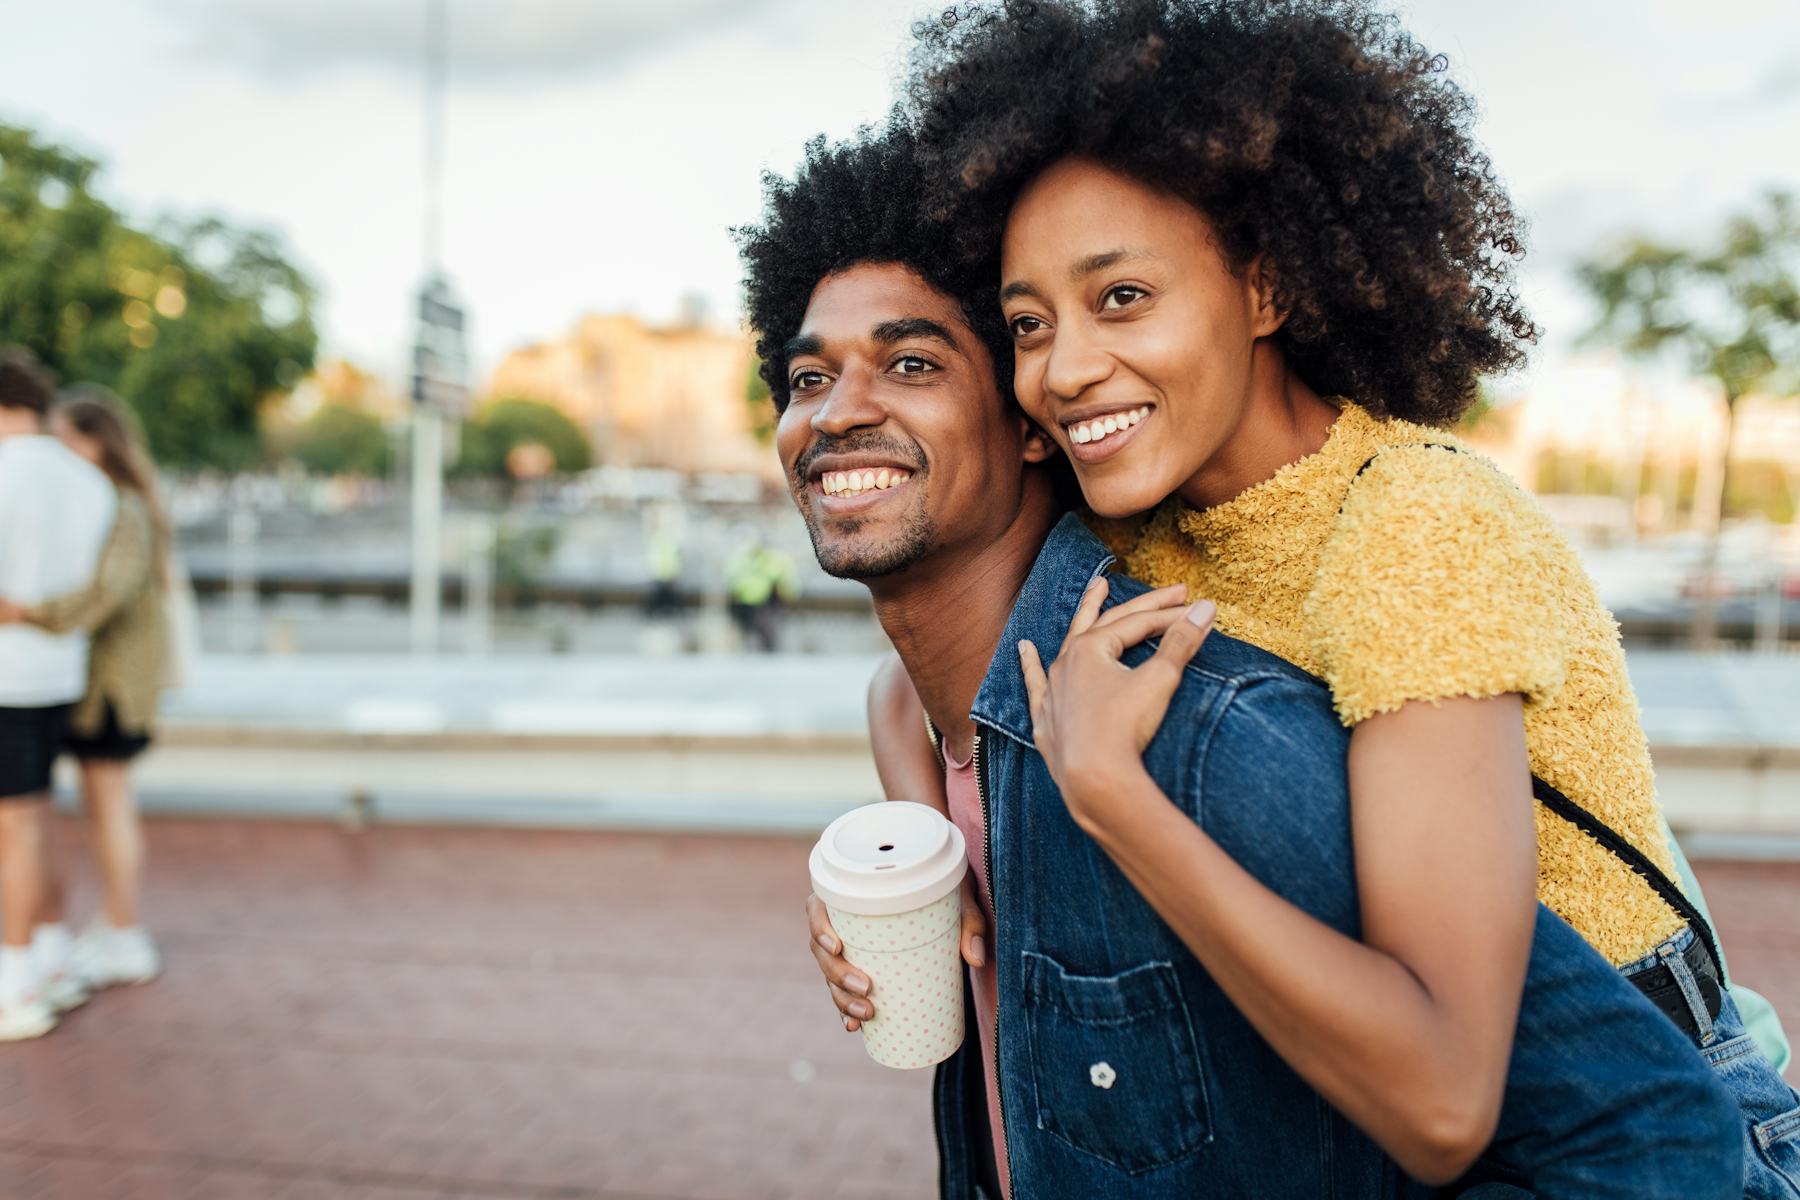 How To Make Your Partner Feel Loved Through Actions